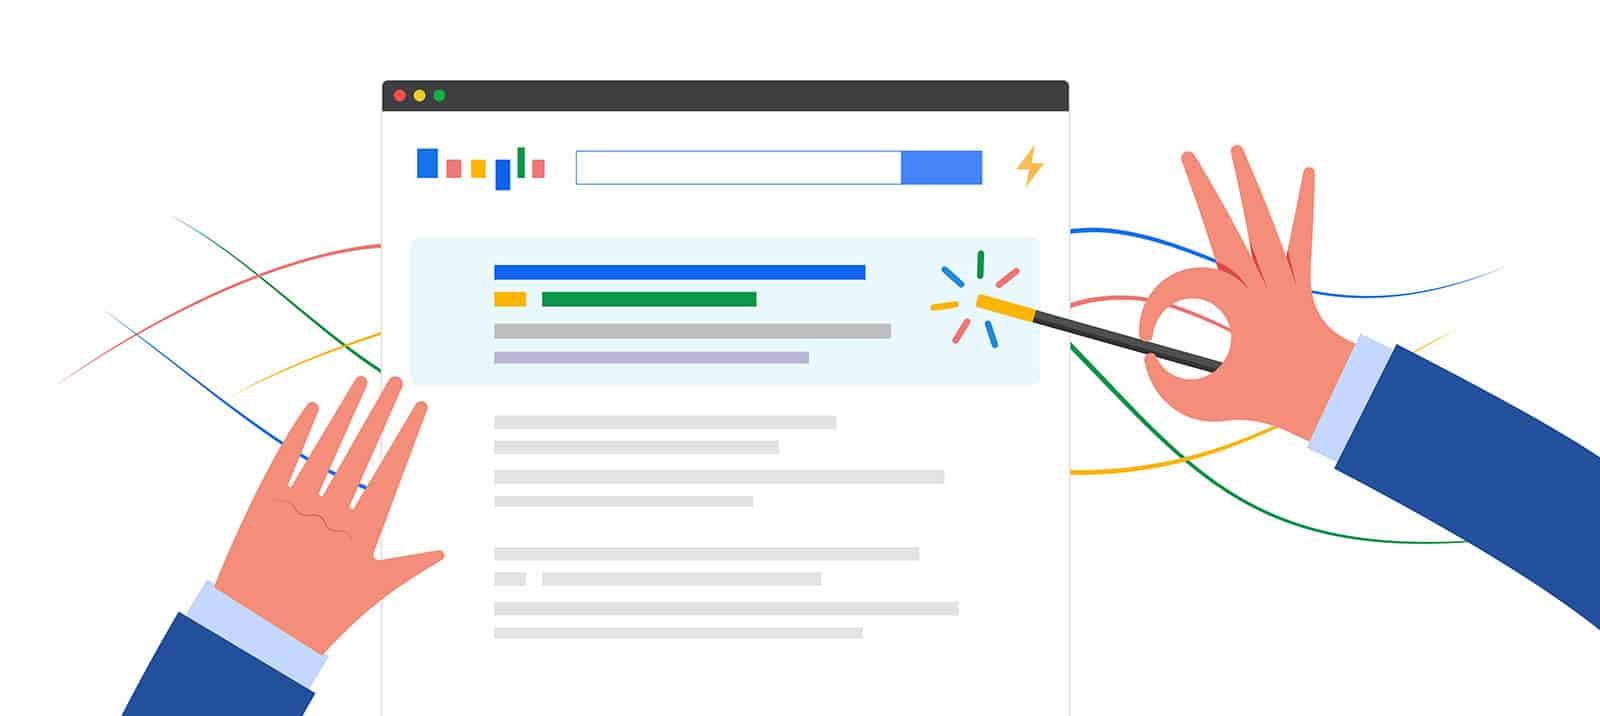 SEO and Google’s “People Also” Features